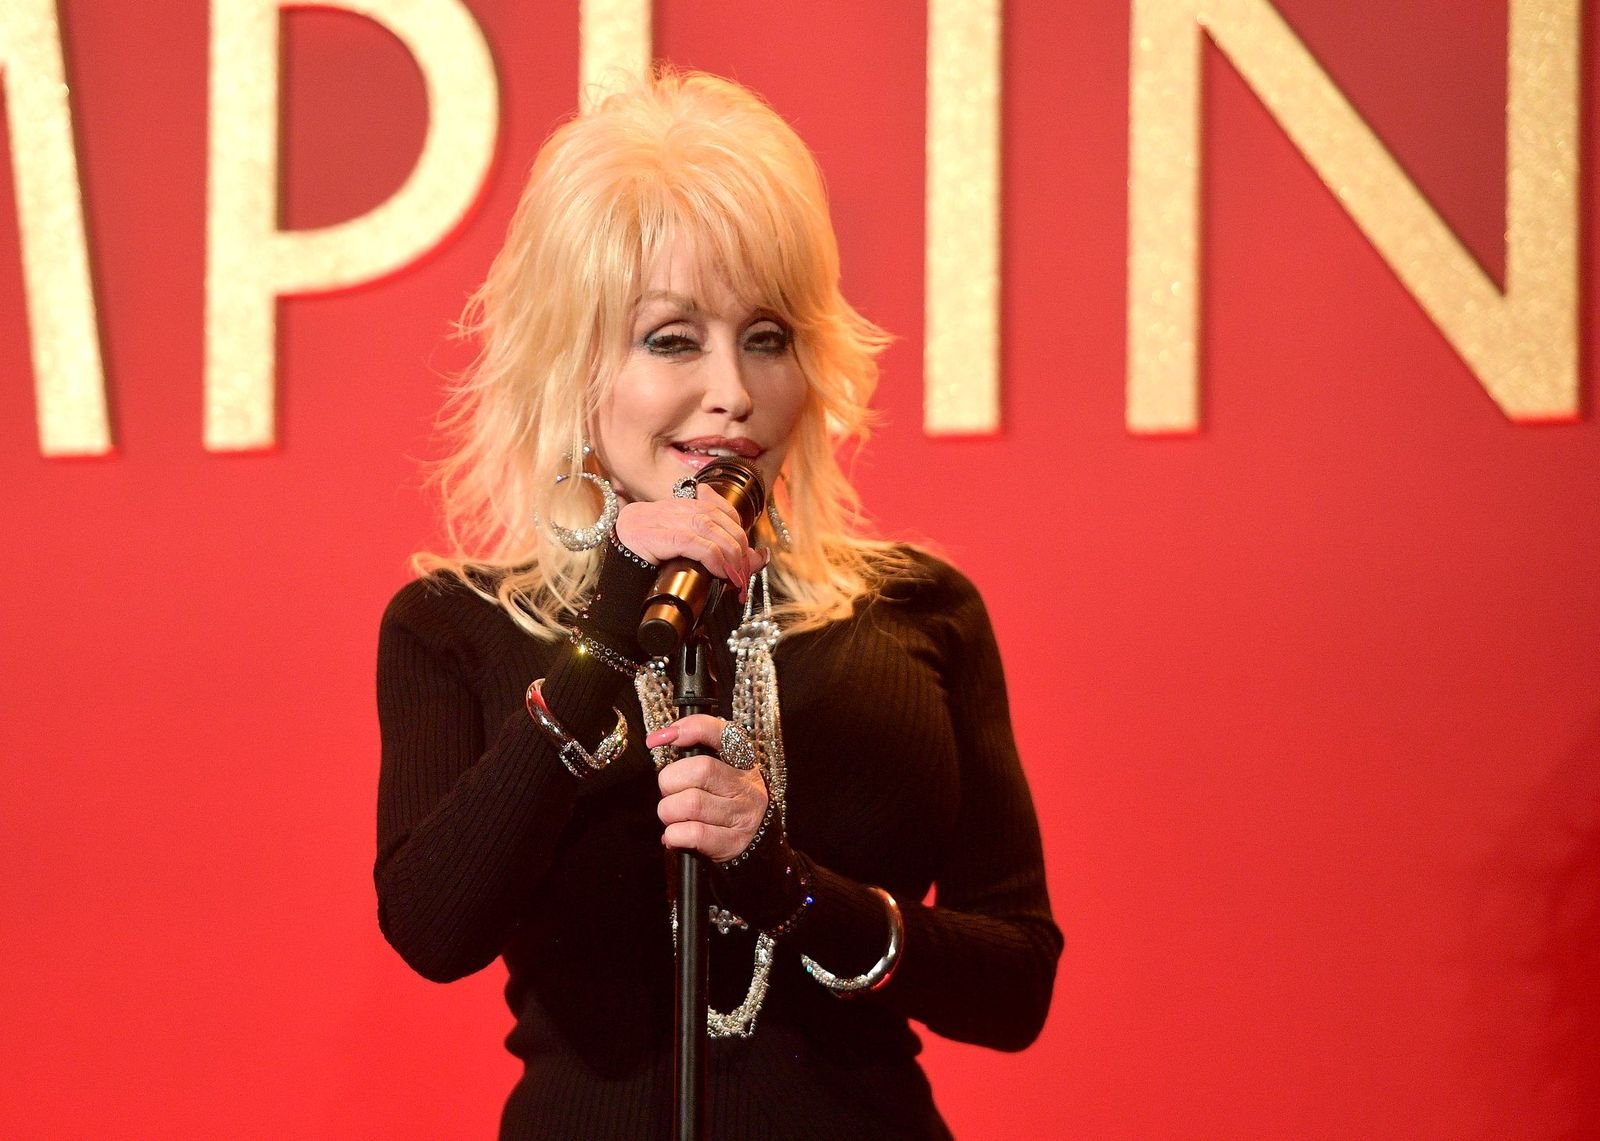 Dolly Parton performs onstage at a luncheon for the Netflix Film Dumplin' at Four Seasons Hotel Los Angeles at Beverly Hills on October 22, 2018 | Photo: Getty Images